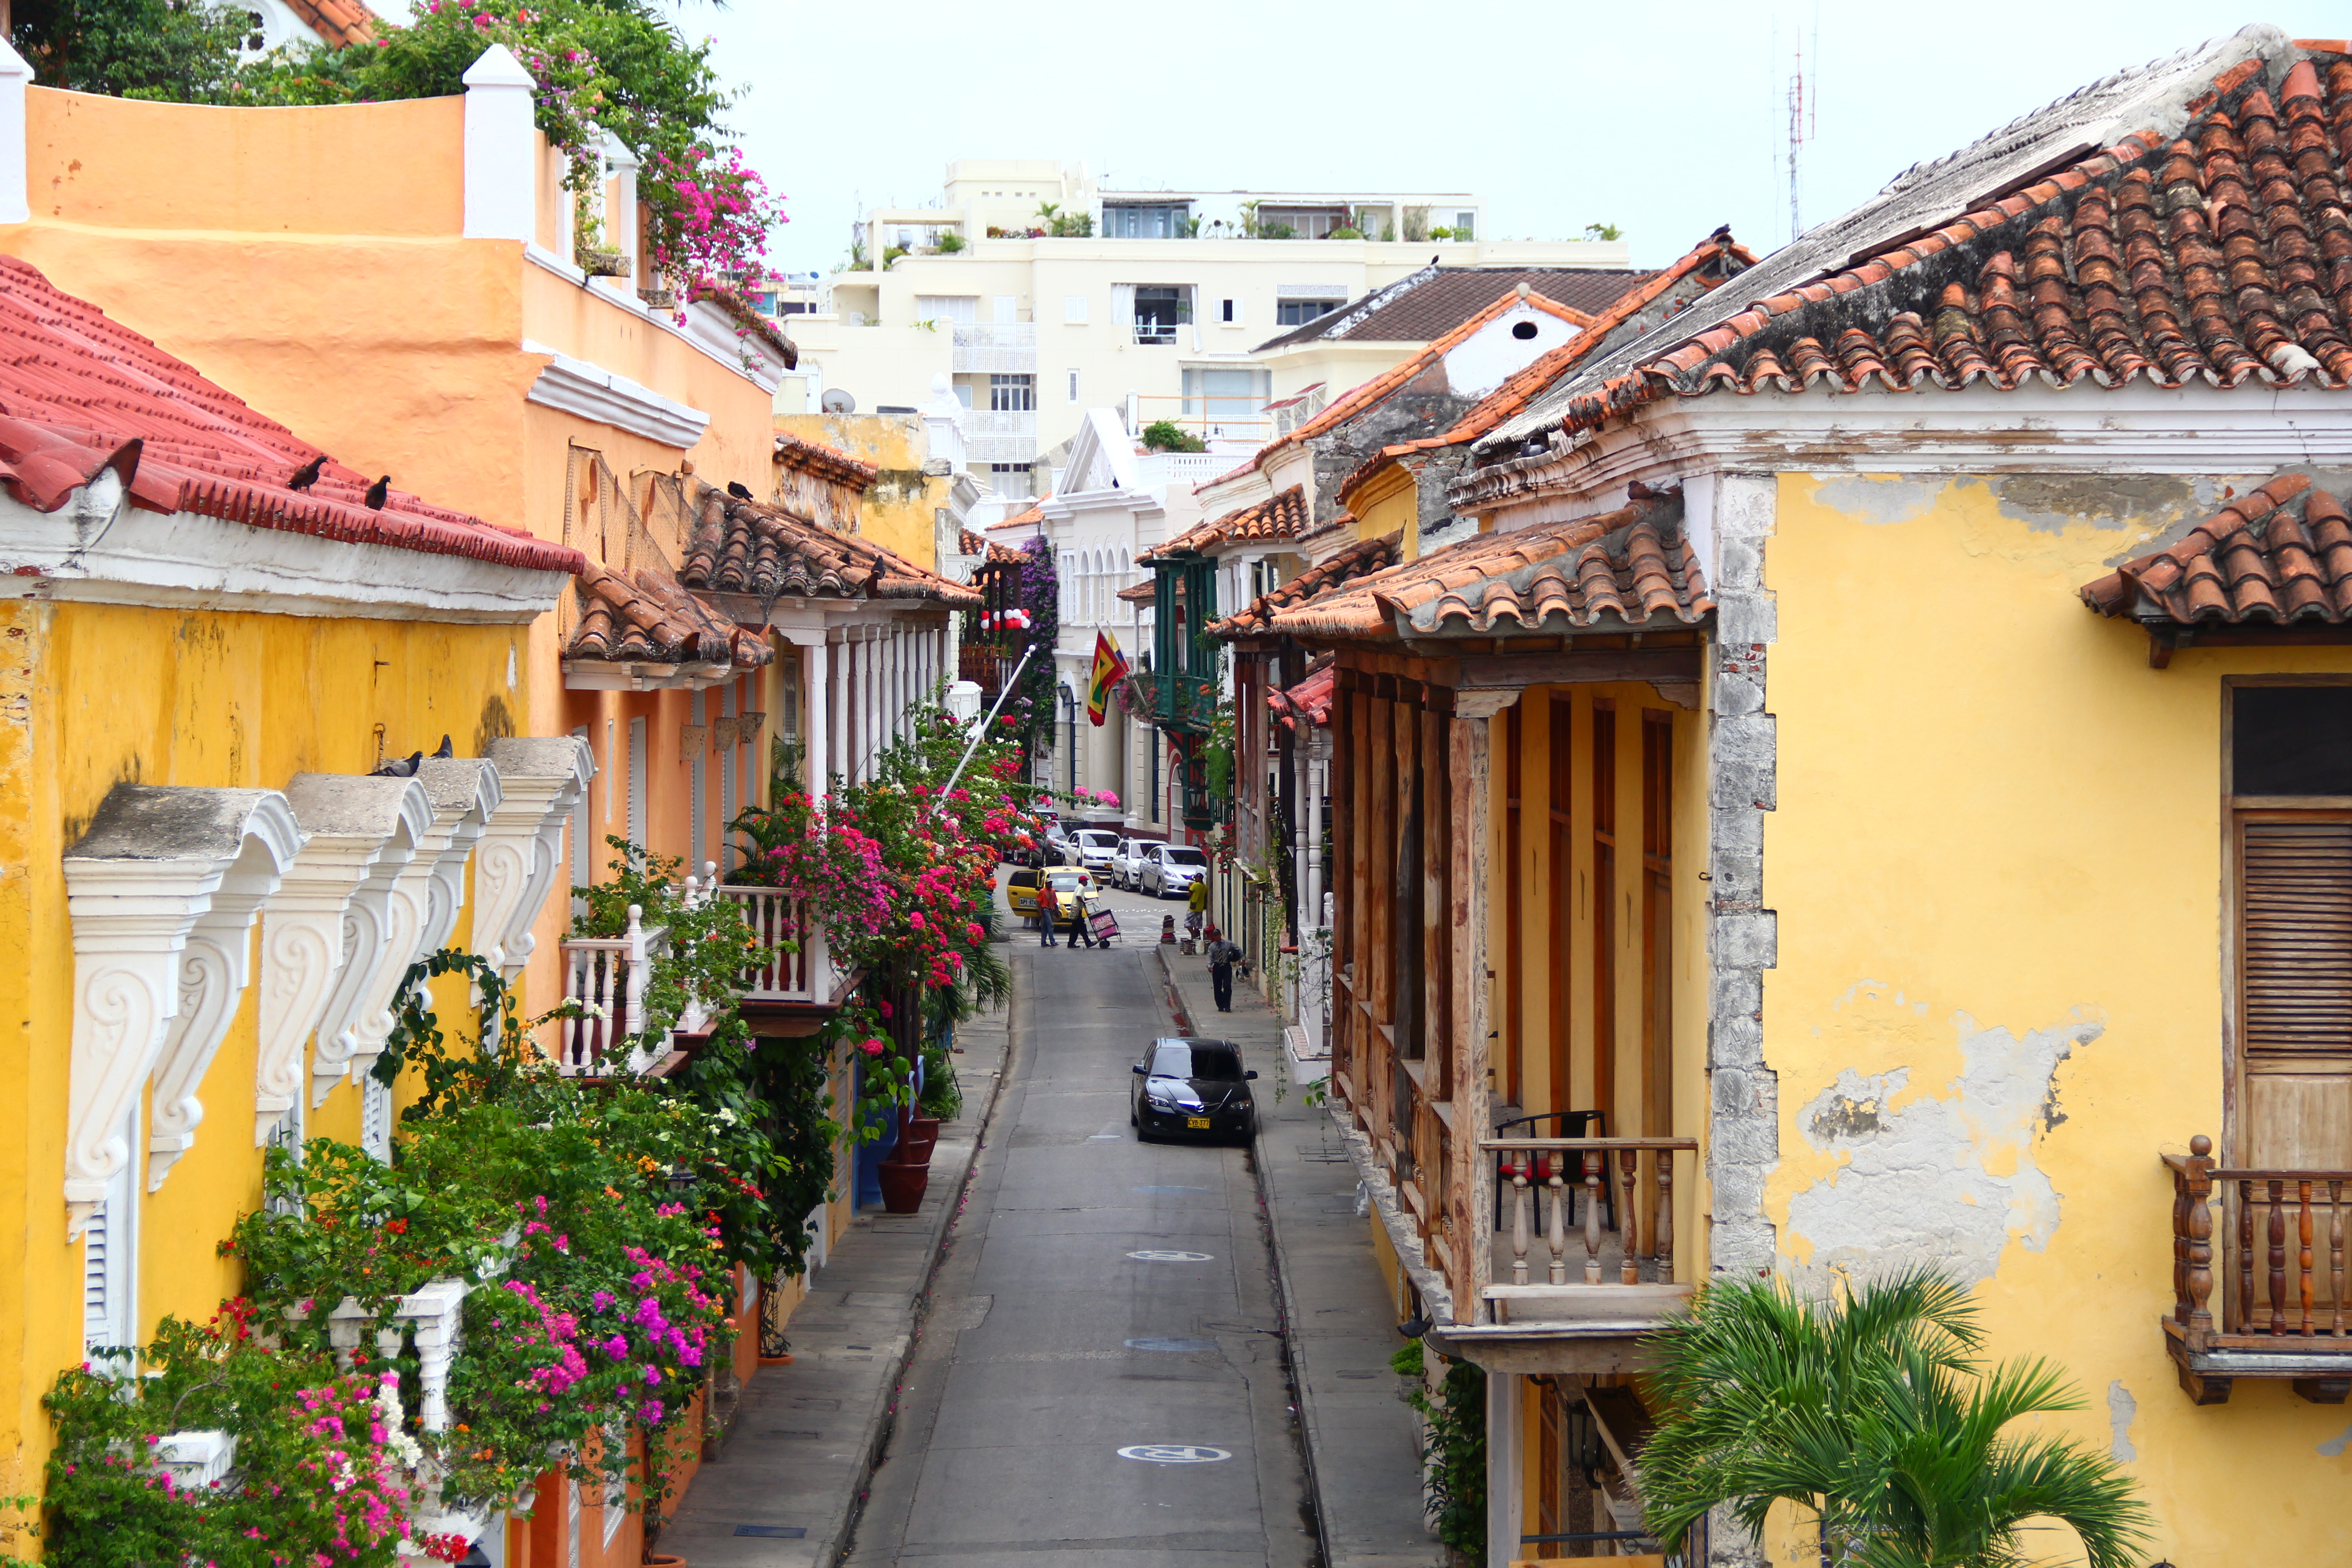 Flight Deal: Fly To Cartagena, Colombia For As Low As $312 From The Northeast